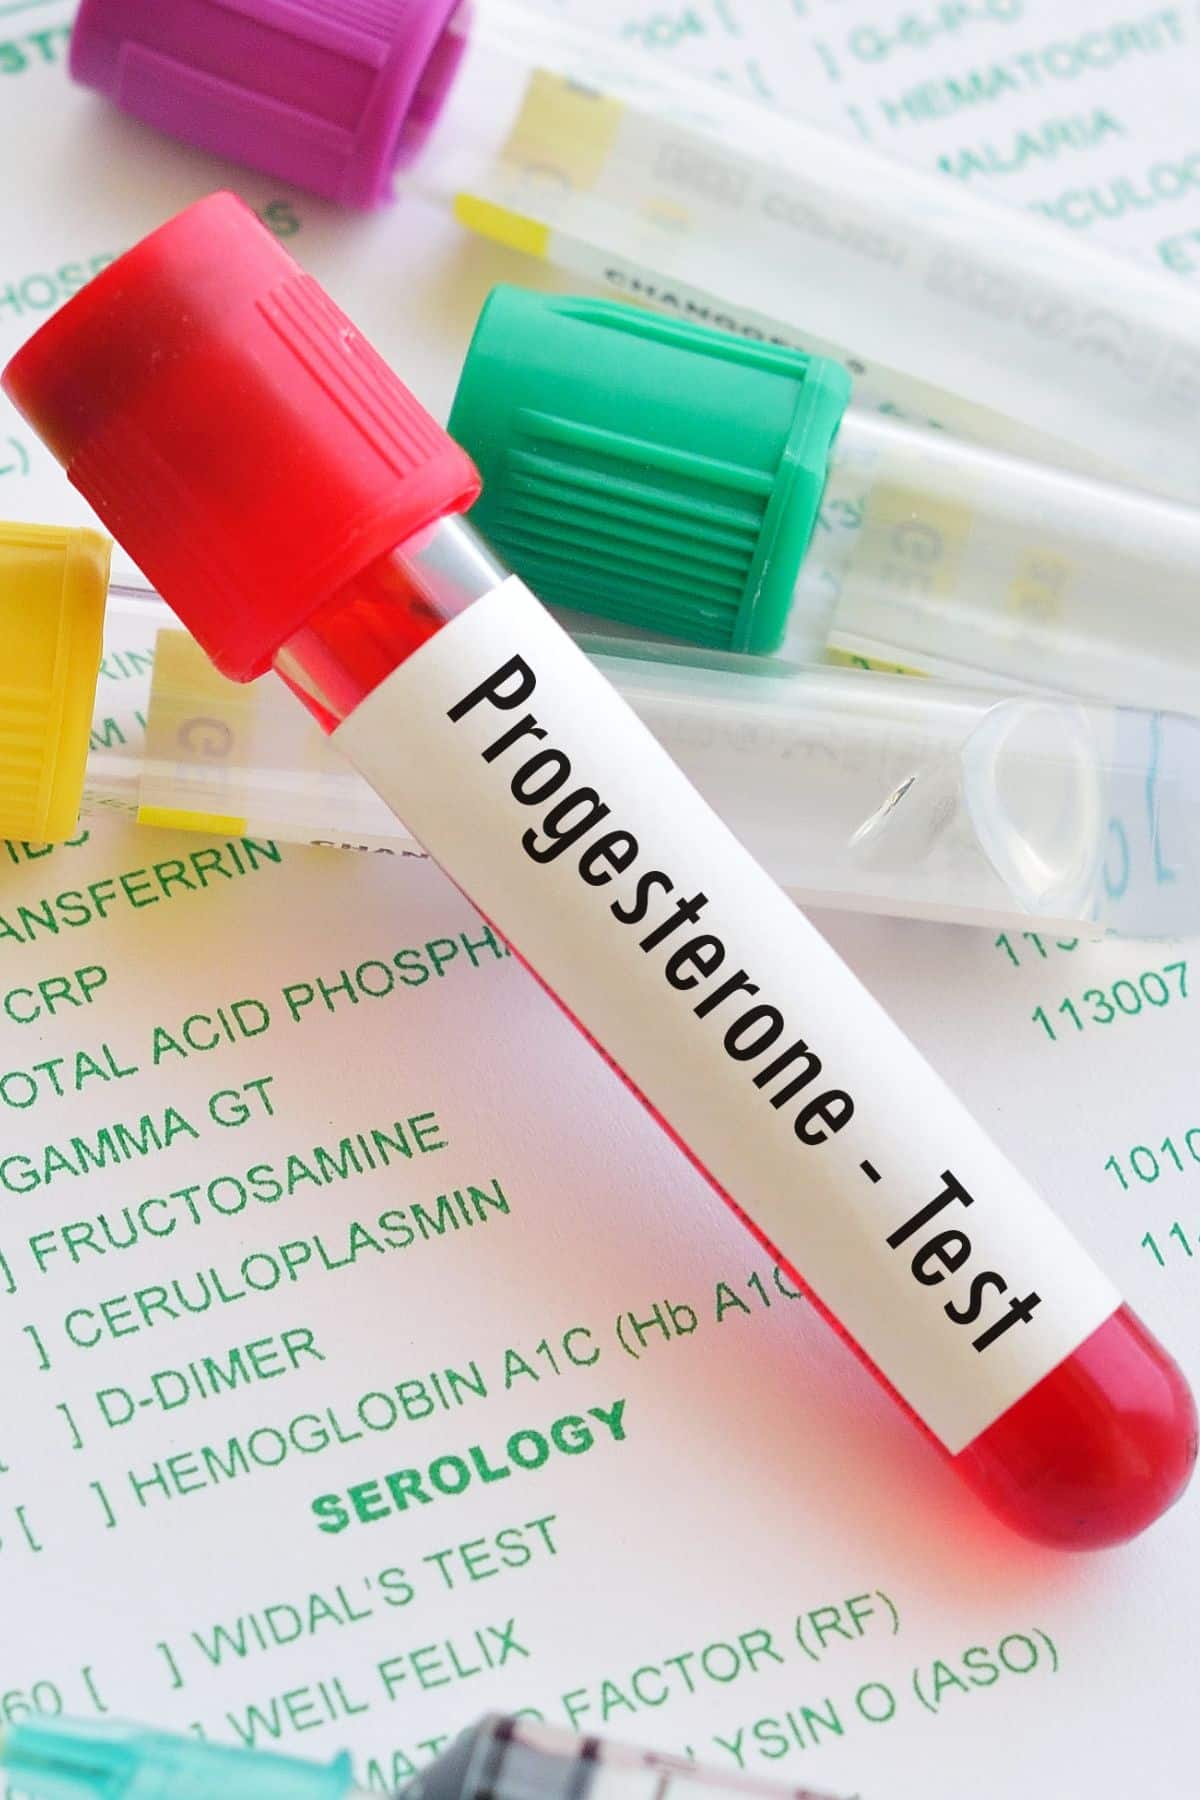 a test tube labeled "progesterone test".